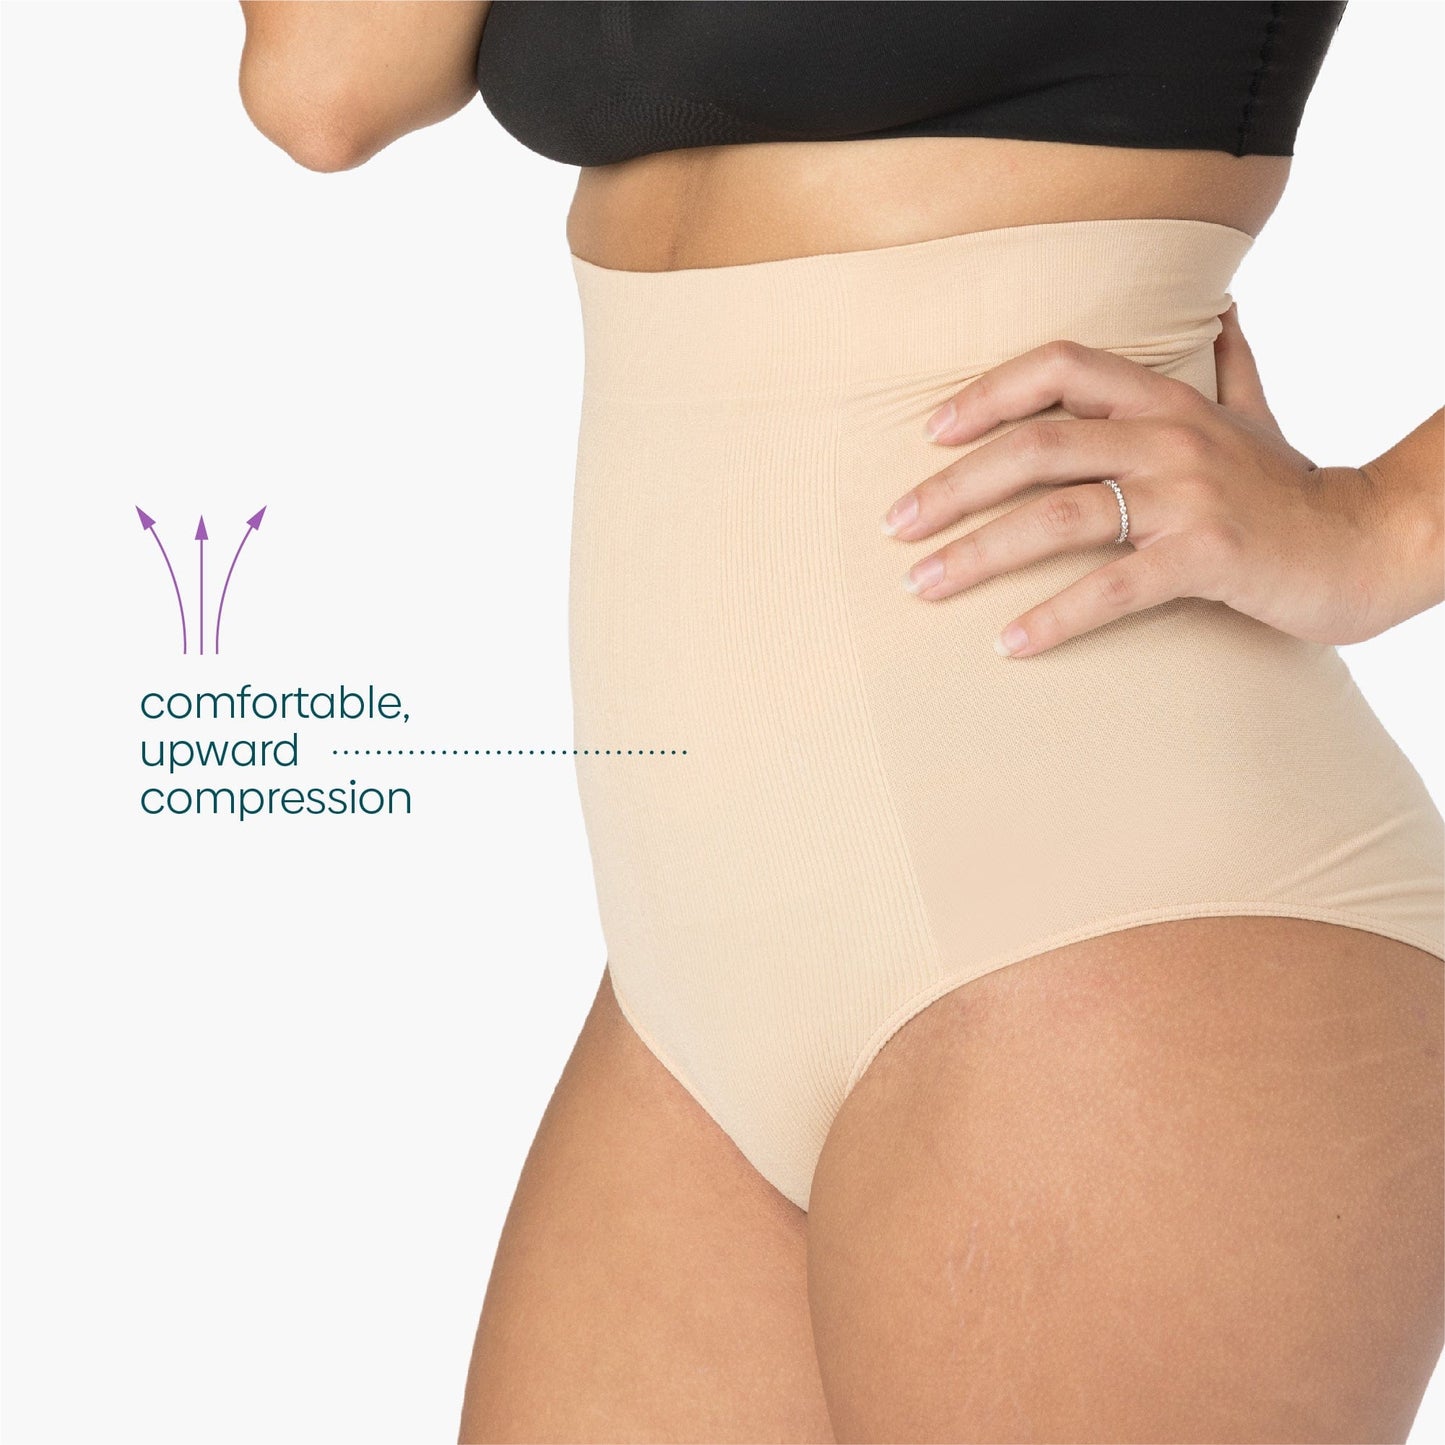 Post baby panty in nude color showing comfortable compression